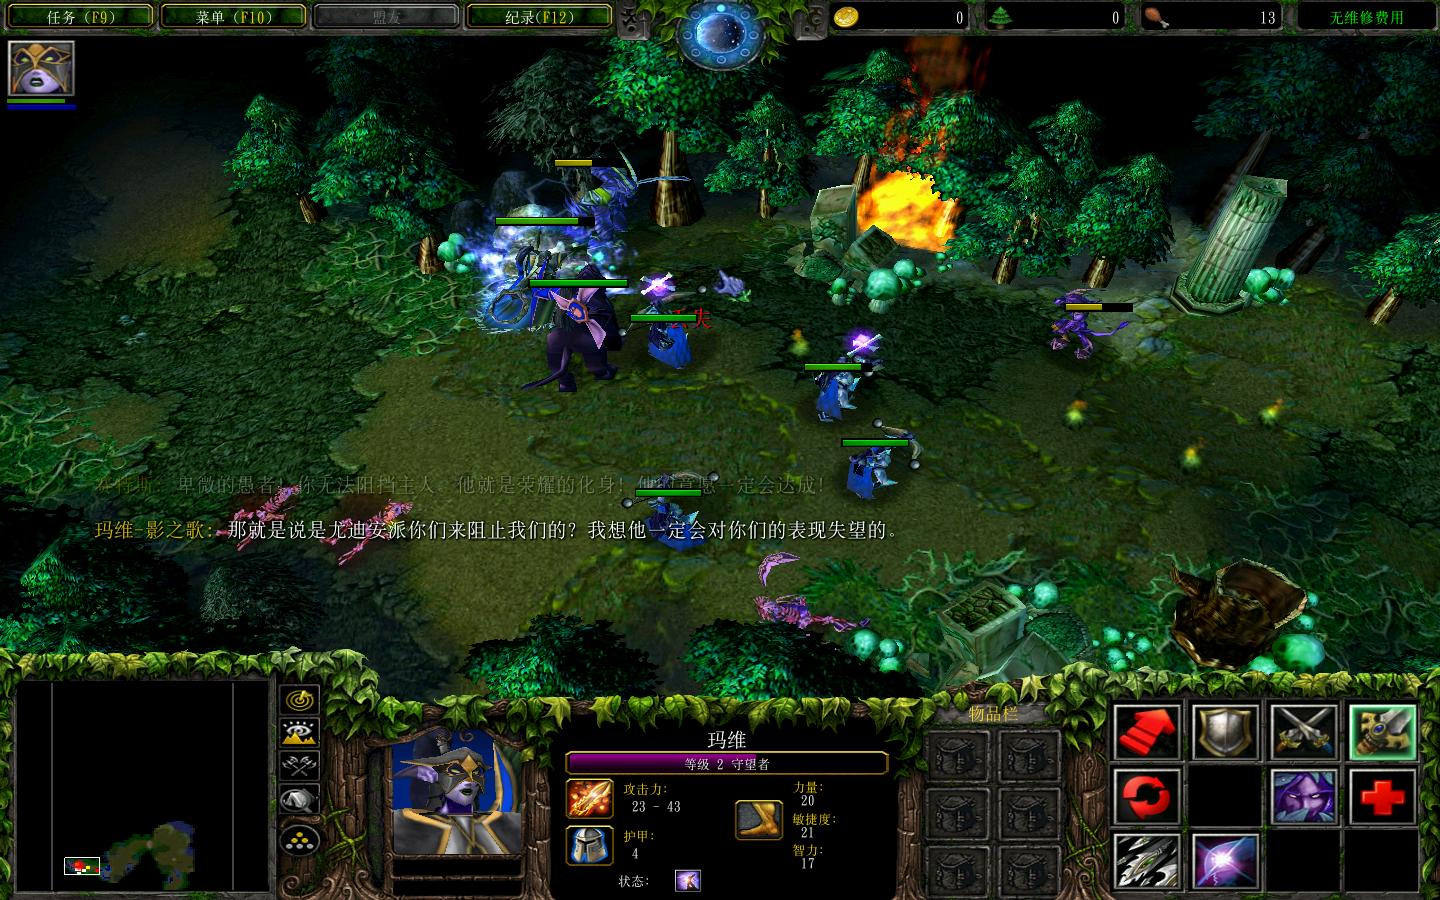 ħ3Warcraft III The Frozen Throne1.24ڤ v0.3